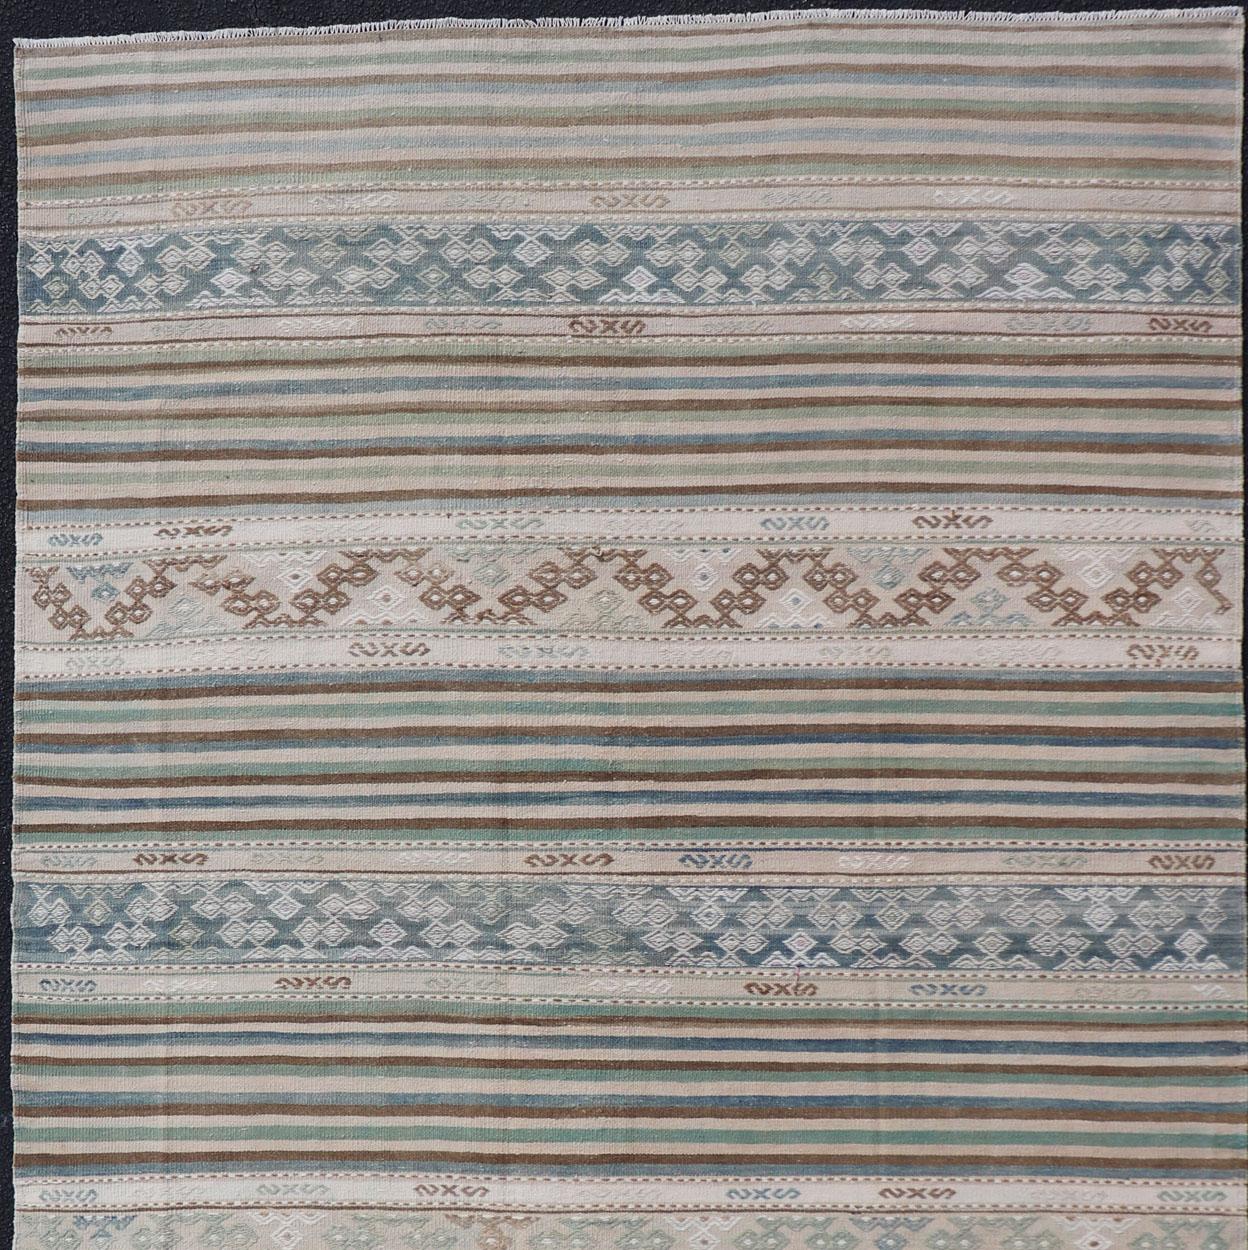 20th Century Turkish Flat-Weave Kilim with Stripes and Embroideries In Blue, Green, and Cream For Sale